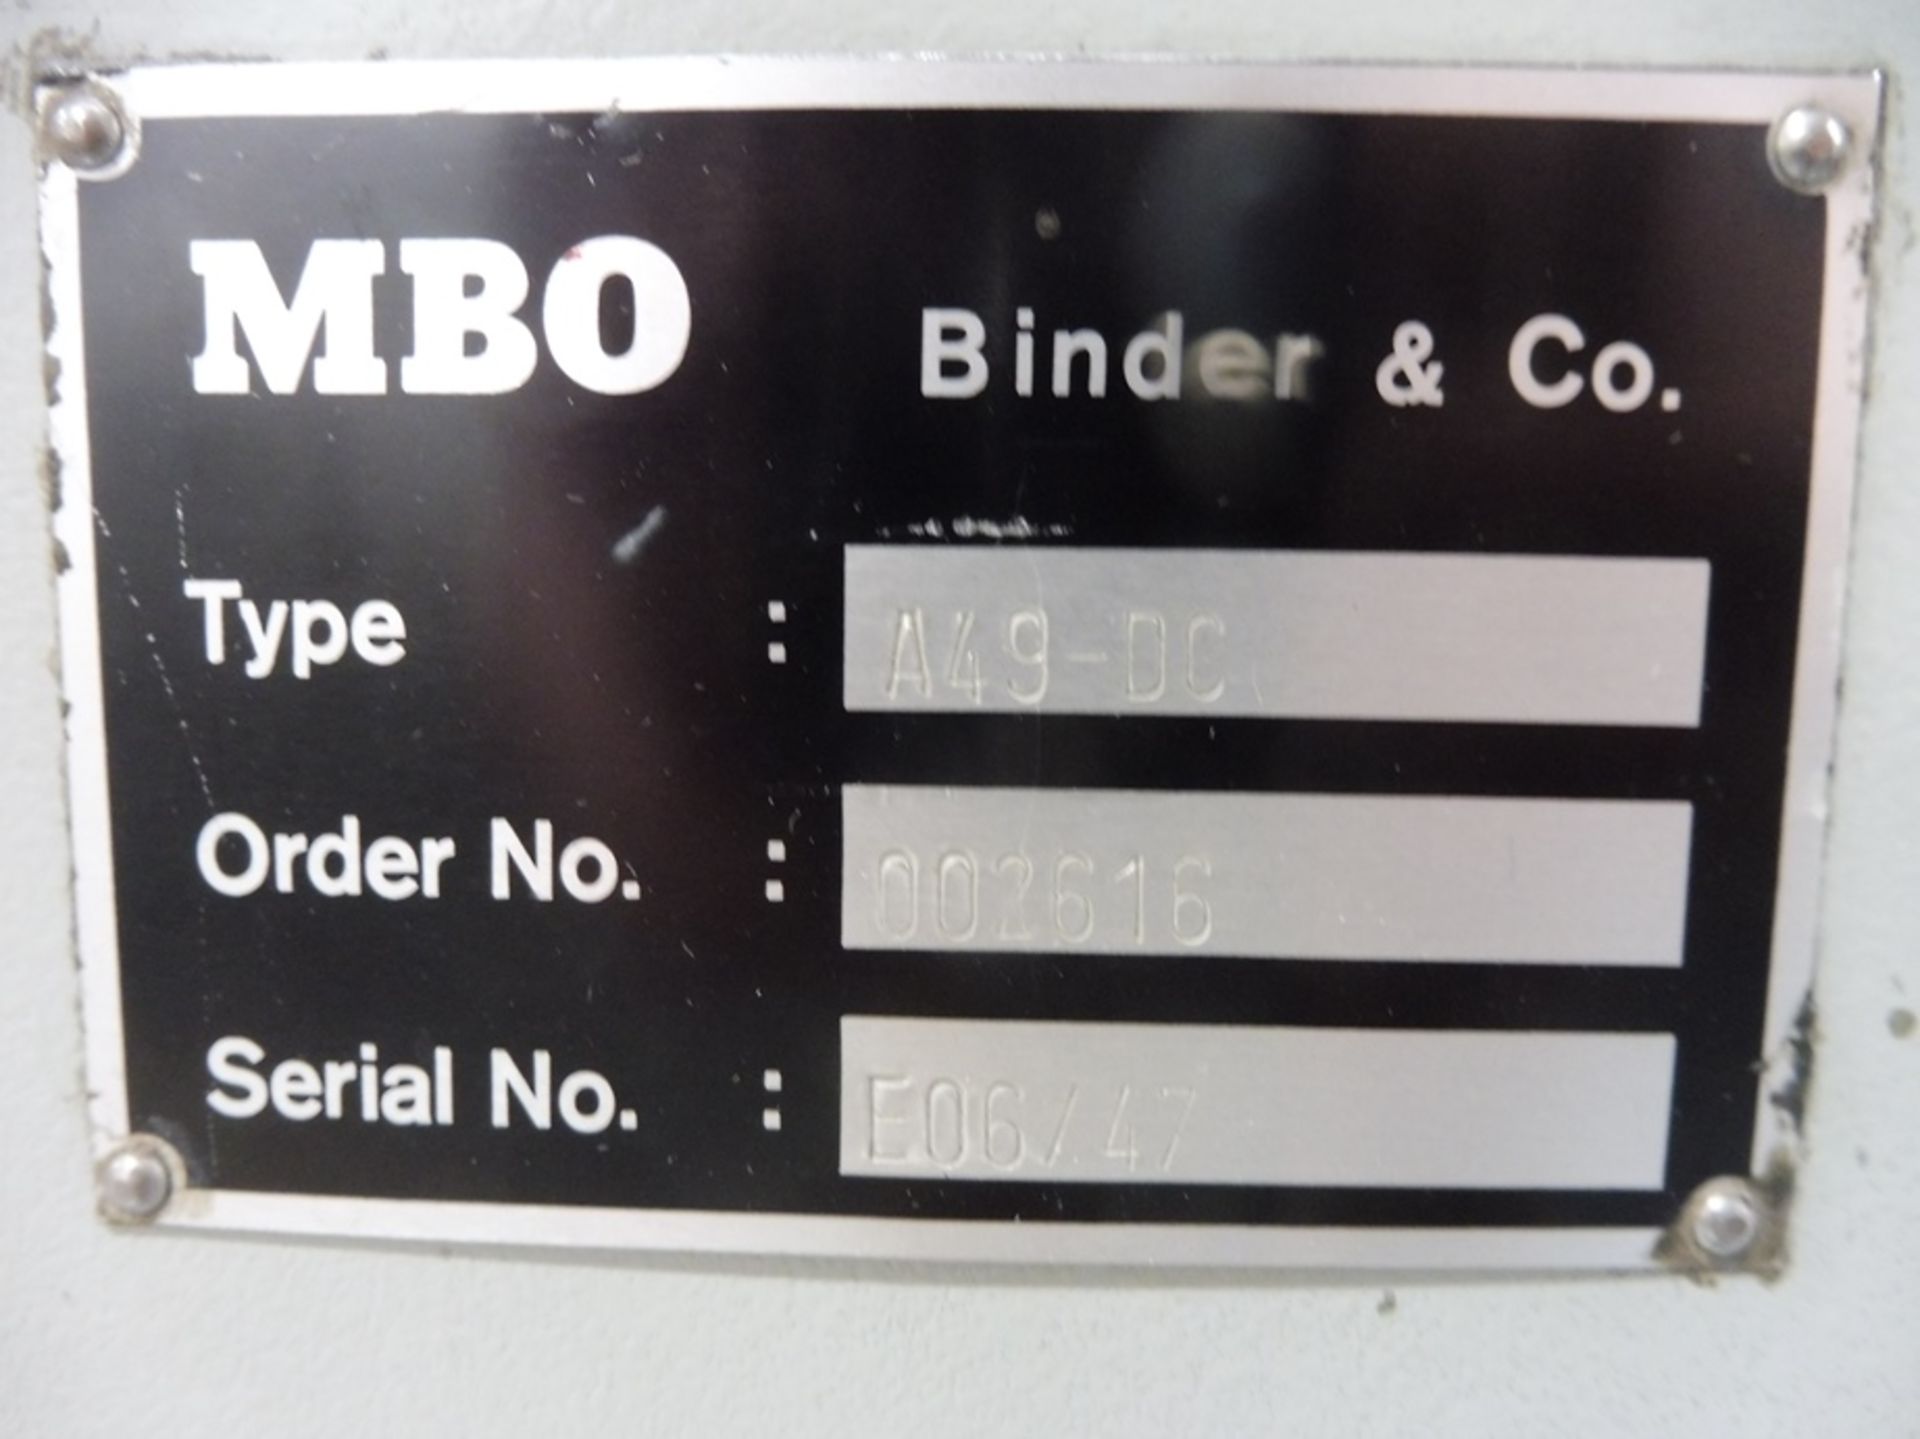 1990 MBO "T49-P" Pile Feed Paper Folder, S/N: EO6747, 4 Page Capacity, (North York Facility) - Image 3 of 4